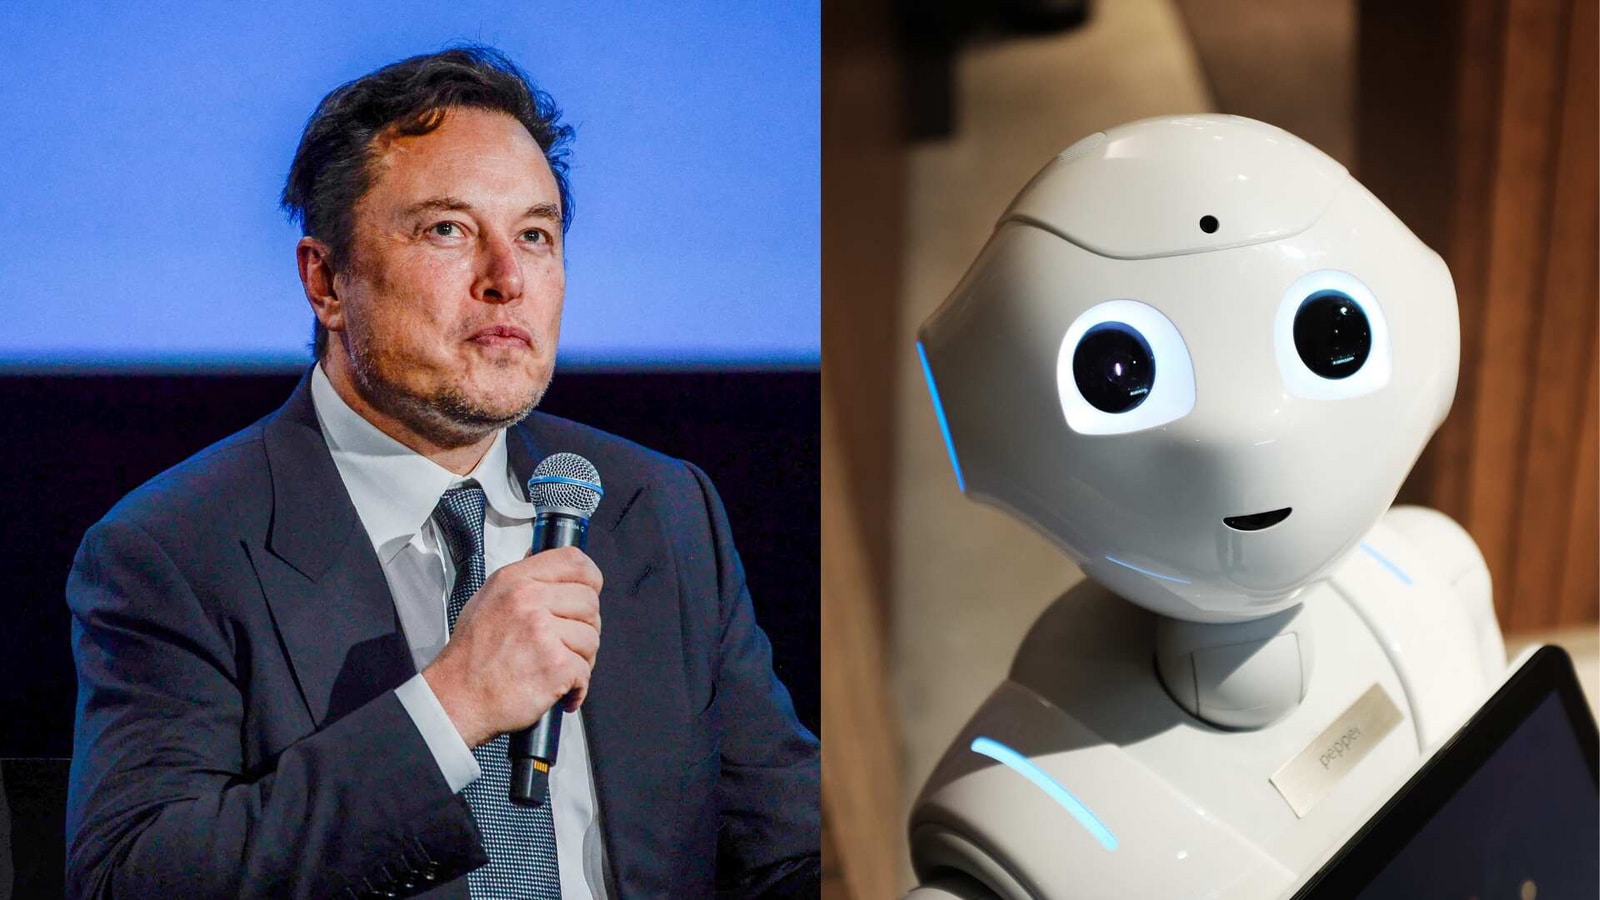 Elon Musk is entering the world of artificial intelligence